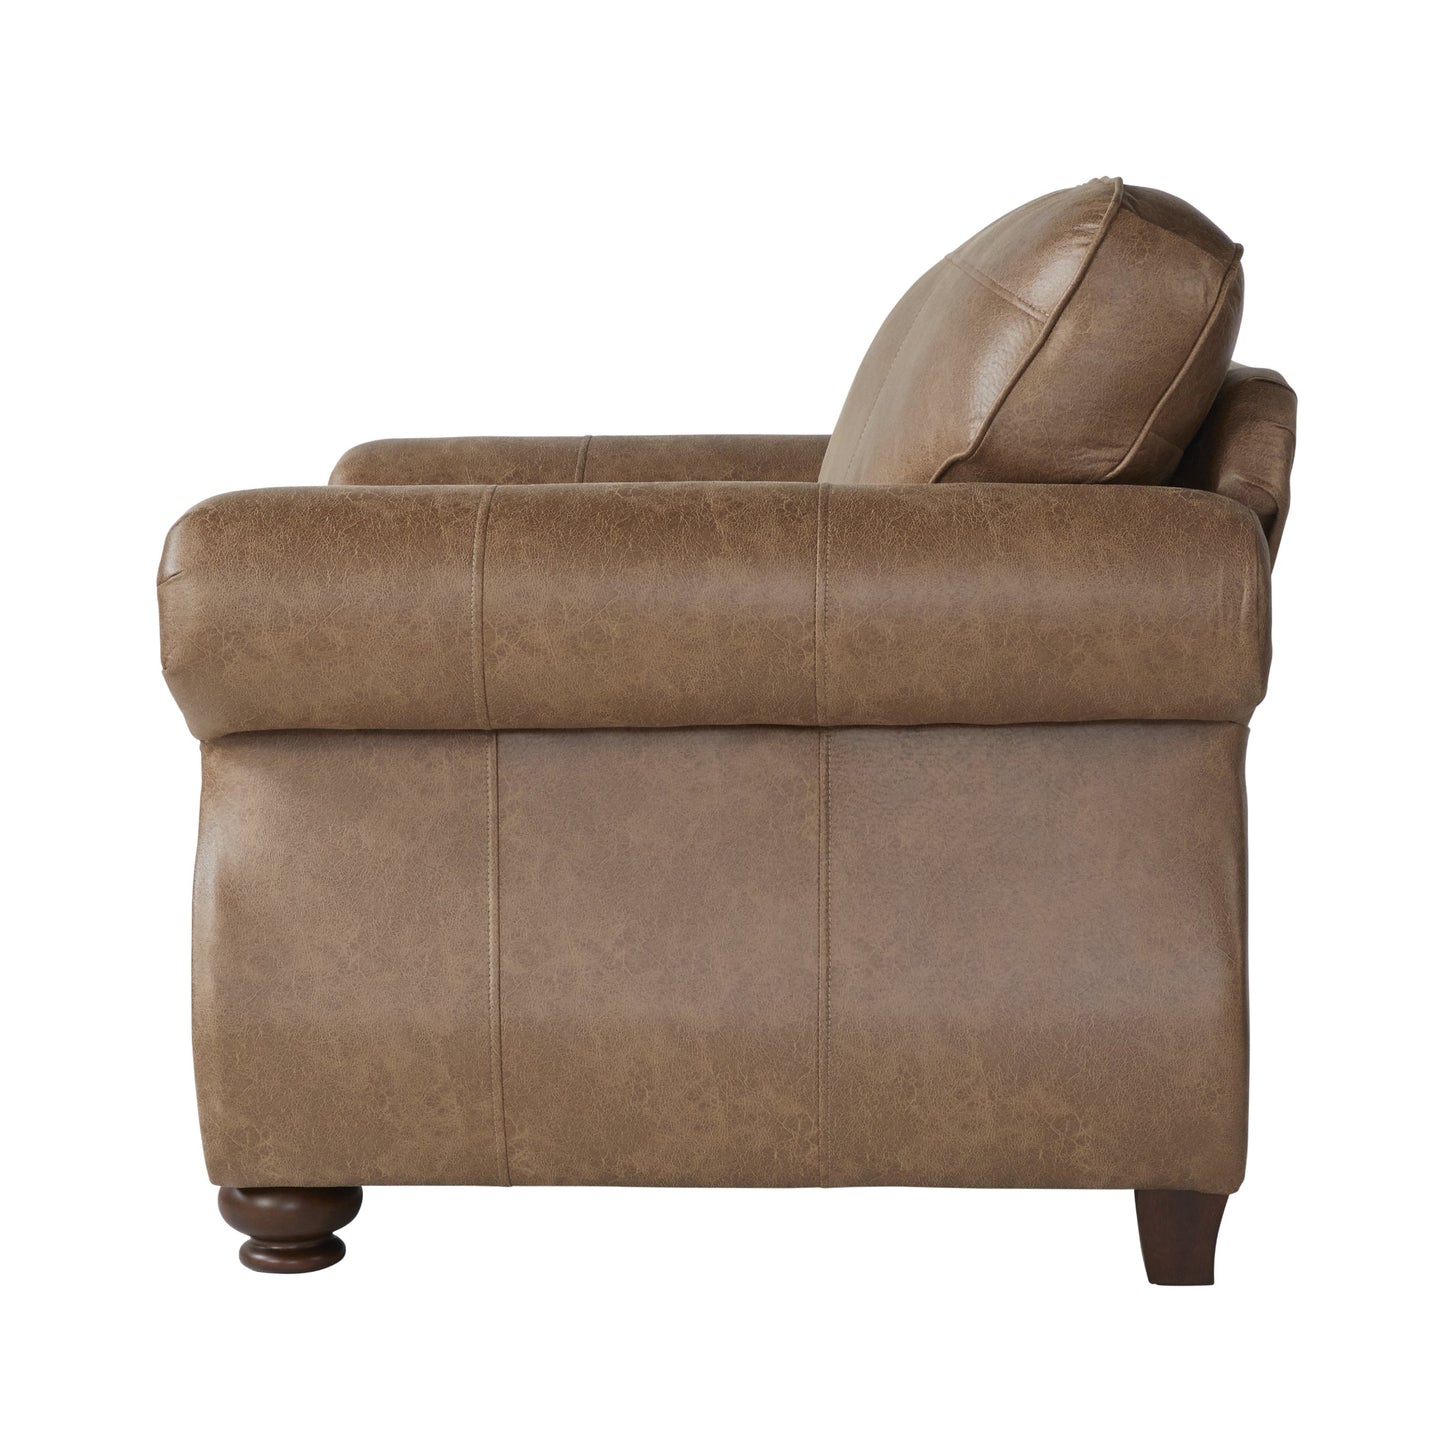 Leinster Faux Leather Arm Chair and Ottoman in Jetson Ginger